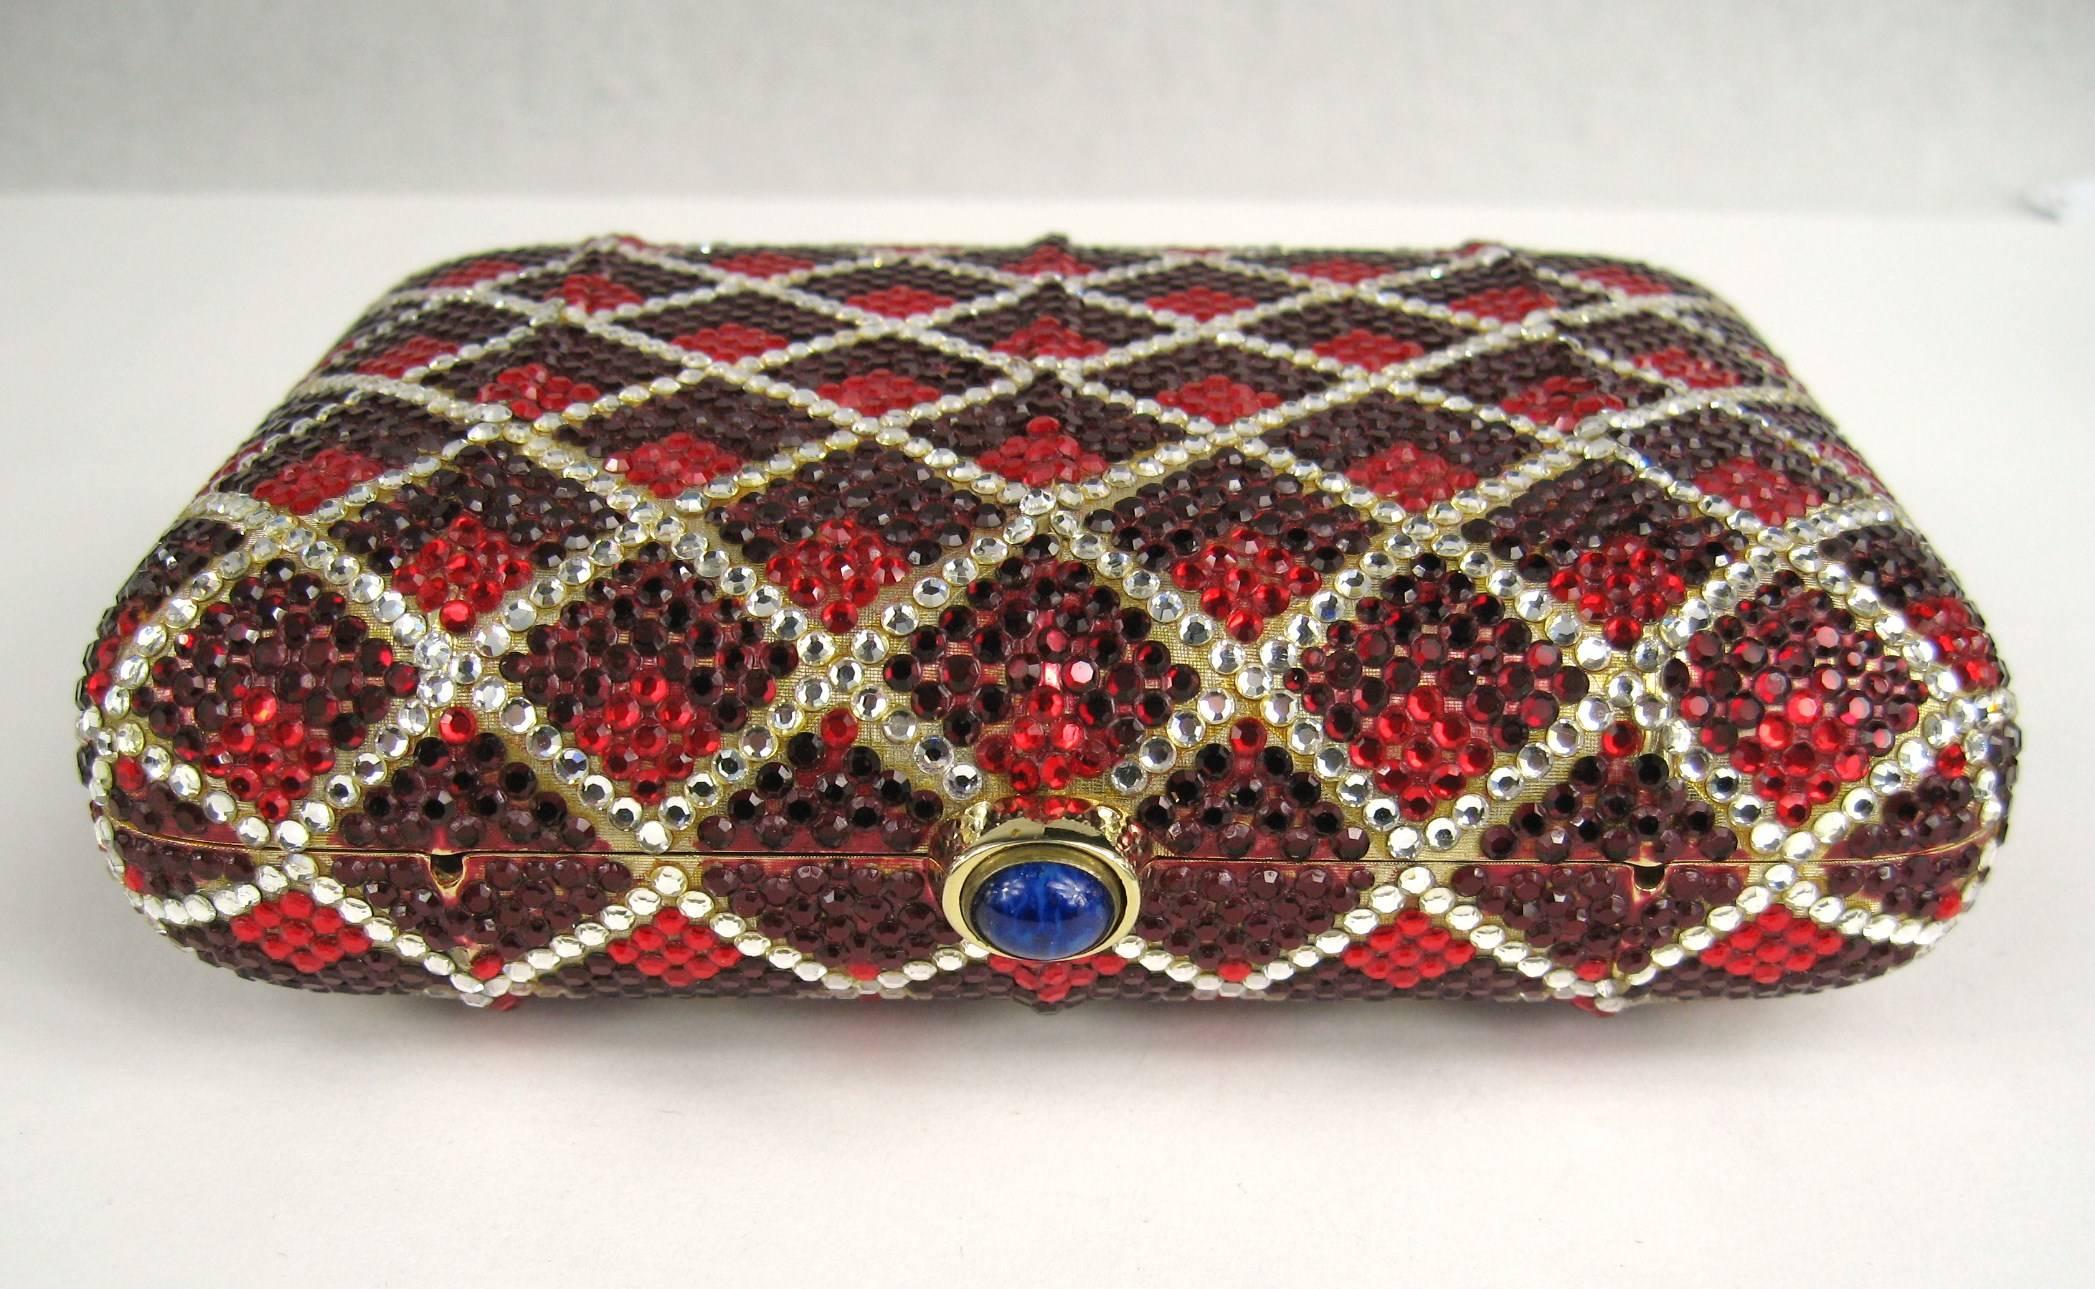 Women's Judith Leiber Red Swarovski Crystal Minaudiere Evening Bag Clutch Holiday Runway For Sale